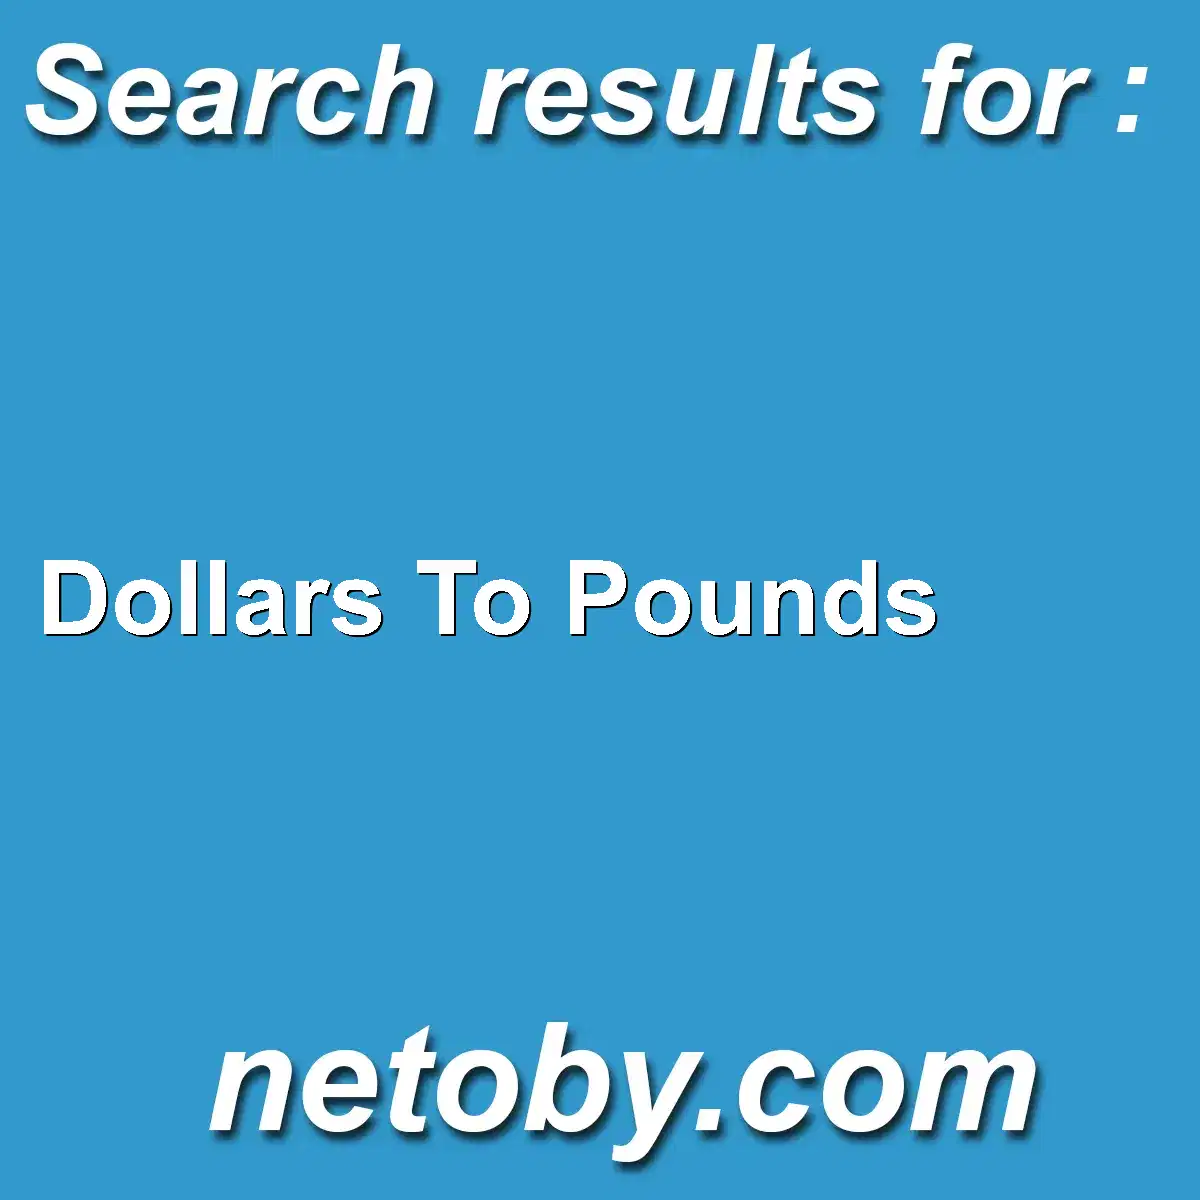 ﻿Dollars To Pounds